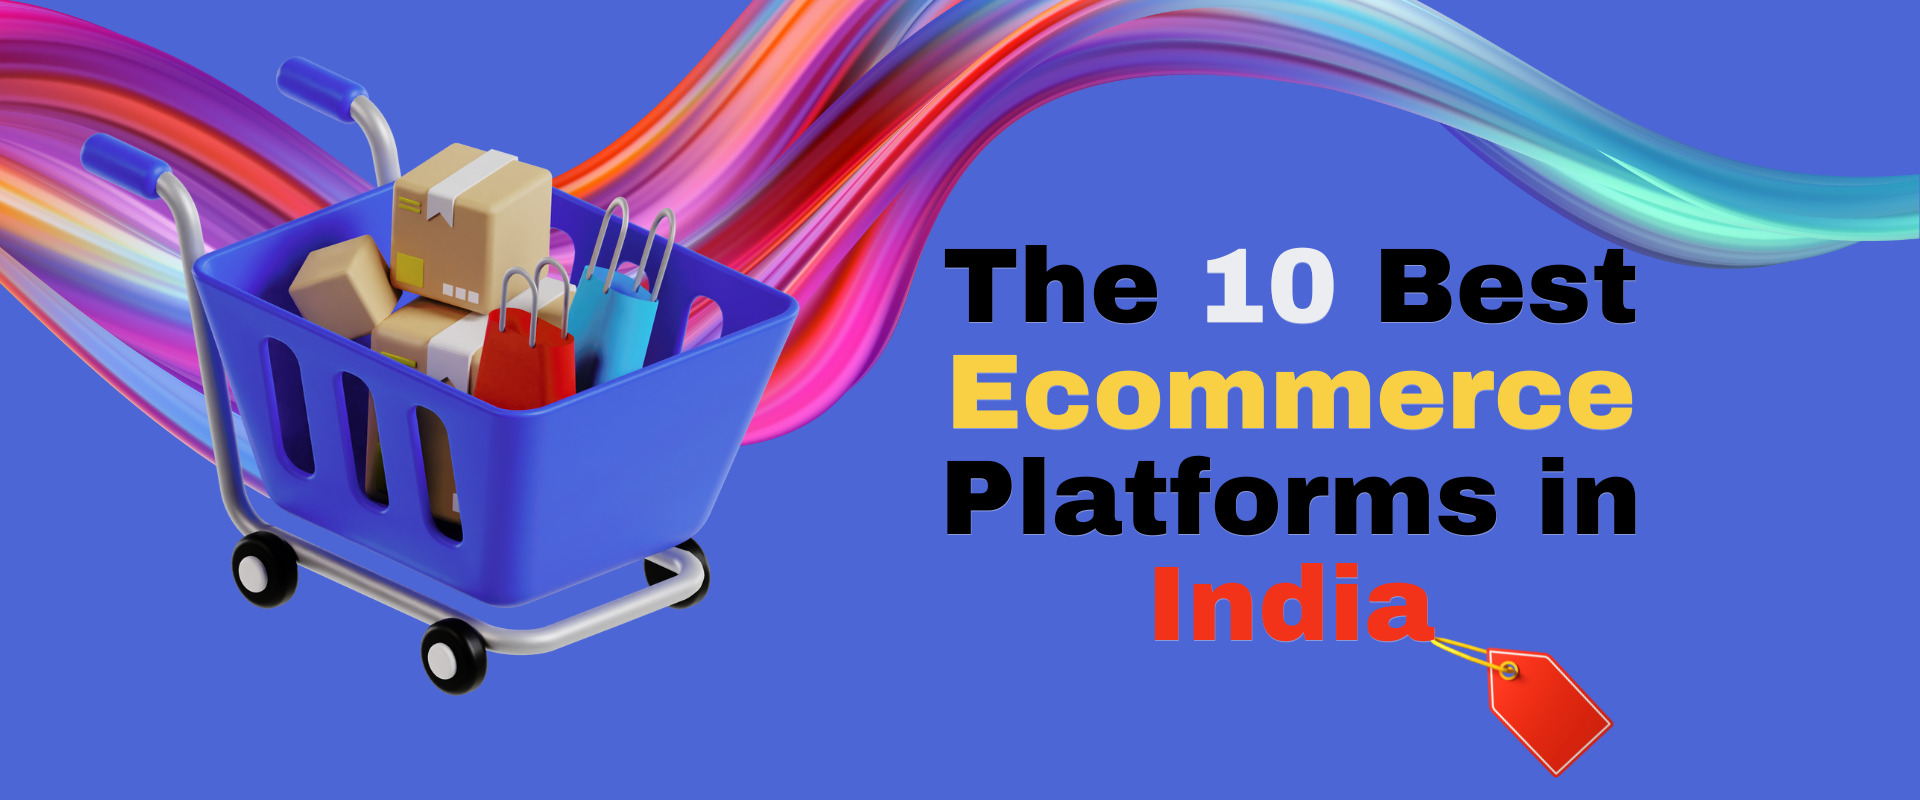 10 Best Ecommerce Platforms in India